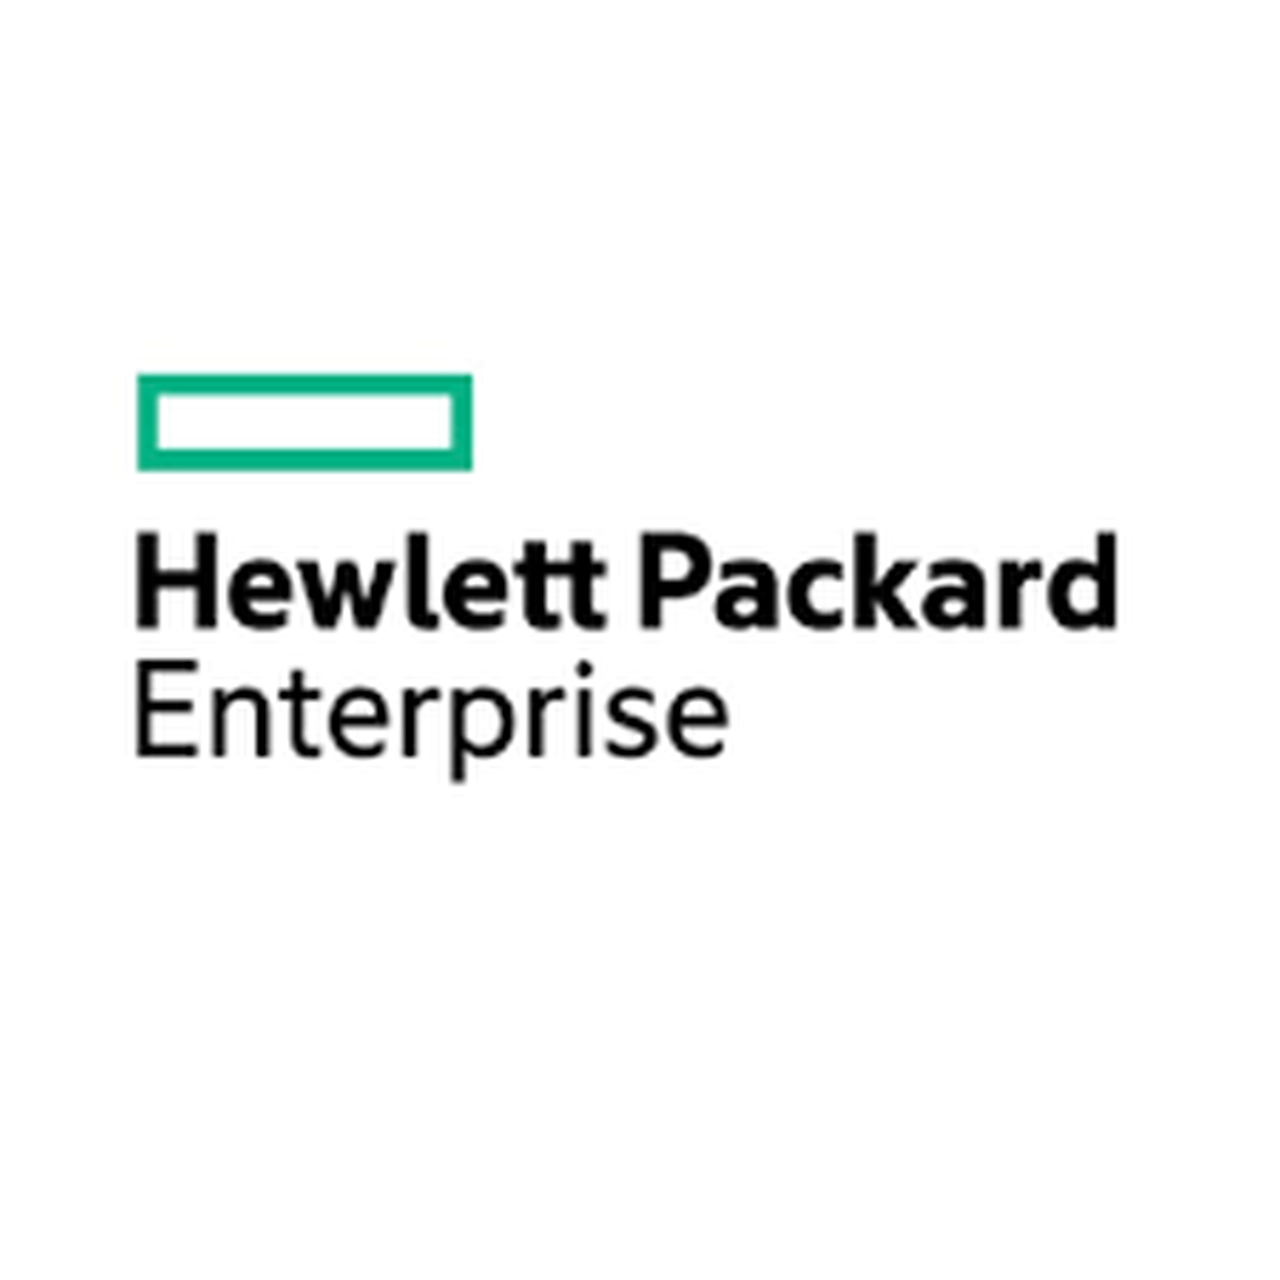 HPE Apollo d6500 Gen10+ CTO Chassis Japan - Japanese localization